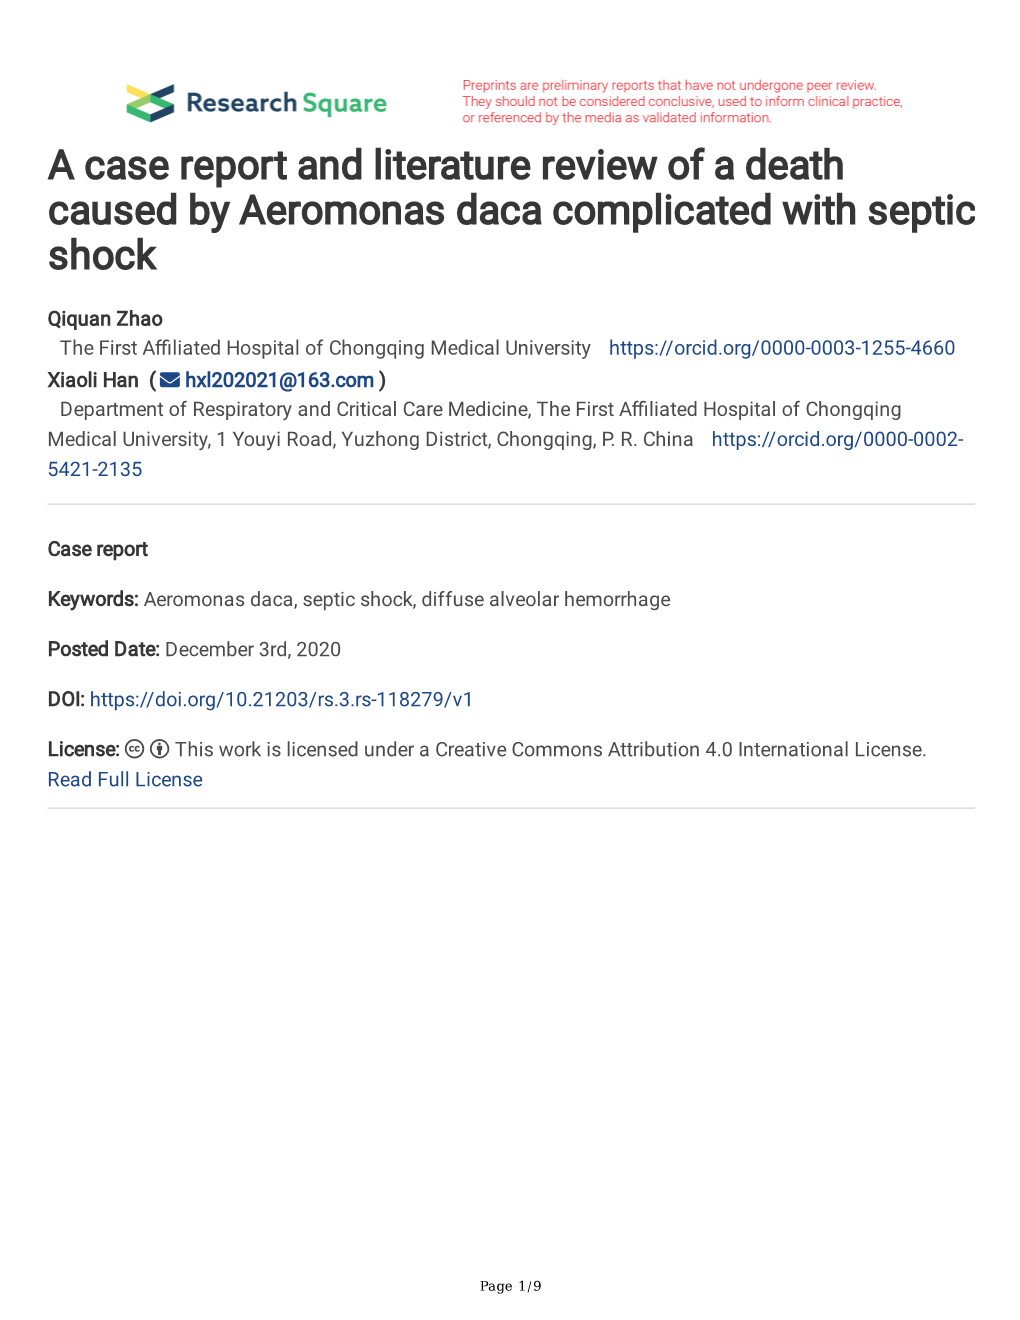 A Case Report and Literature Review of a Death Caused by Aeromonas Daca Complicated with Septic Shock